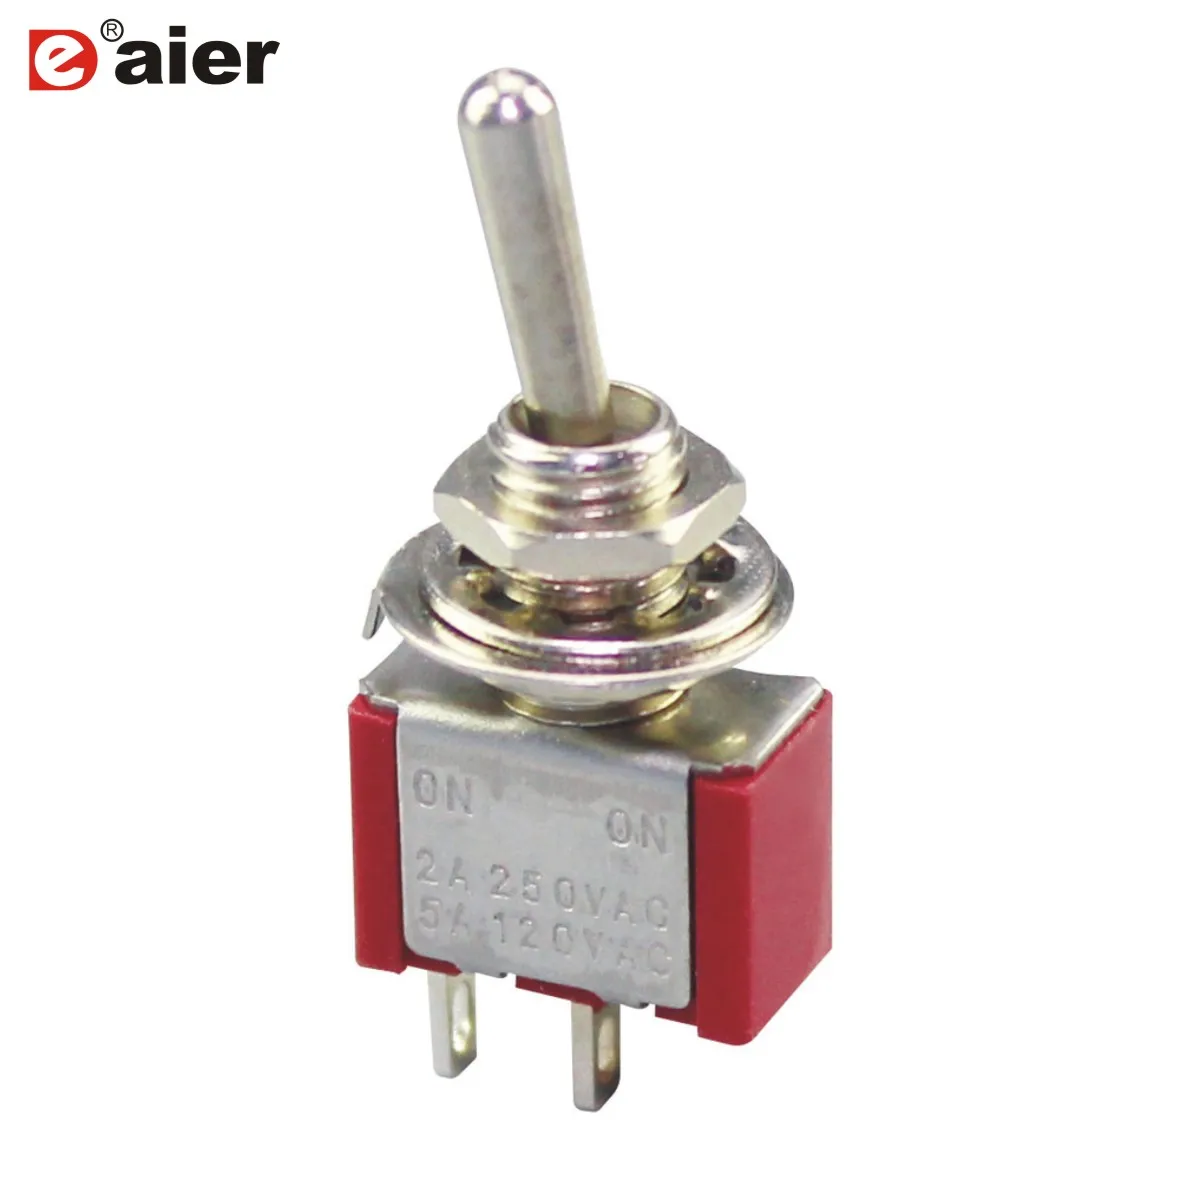 

OFF-(ON) Momentary SPST Miniature Toggle Switch M6X0.75 6A 125VAC 3A 250VAC 2PIN 2 Position 6MM Switches With Solder Terminal